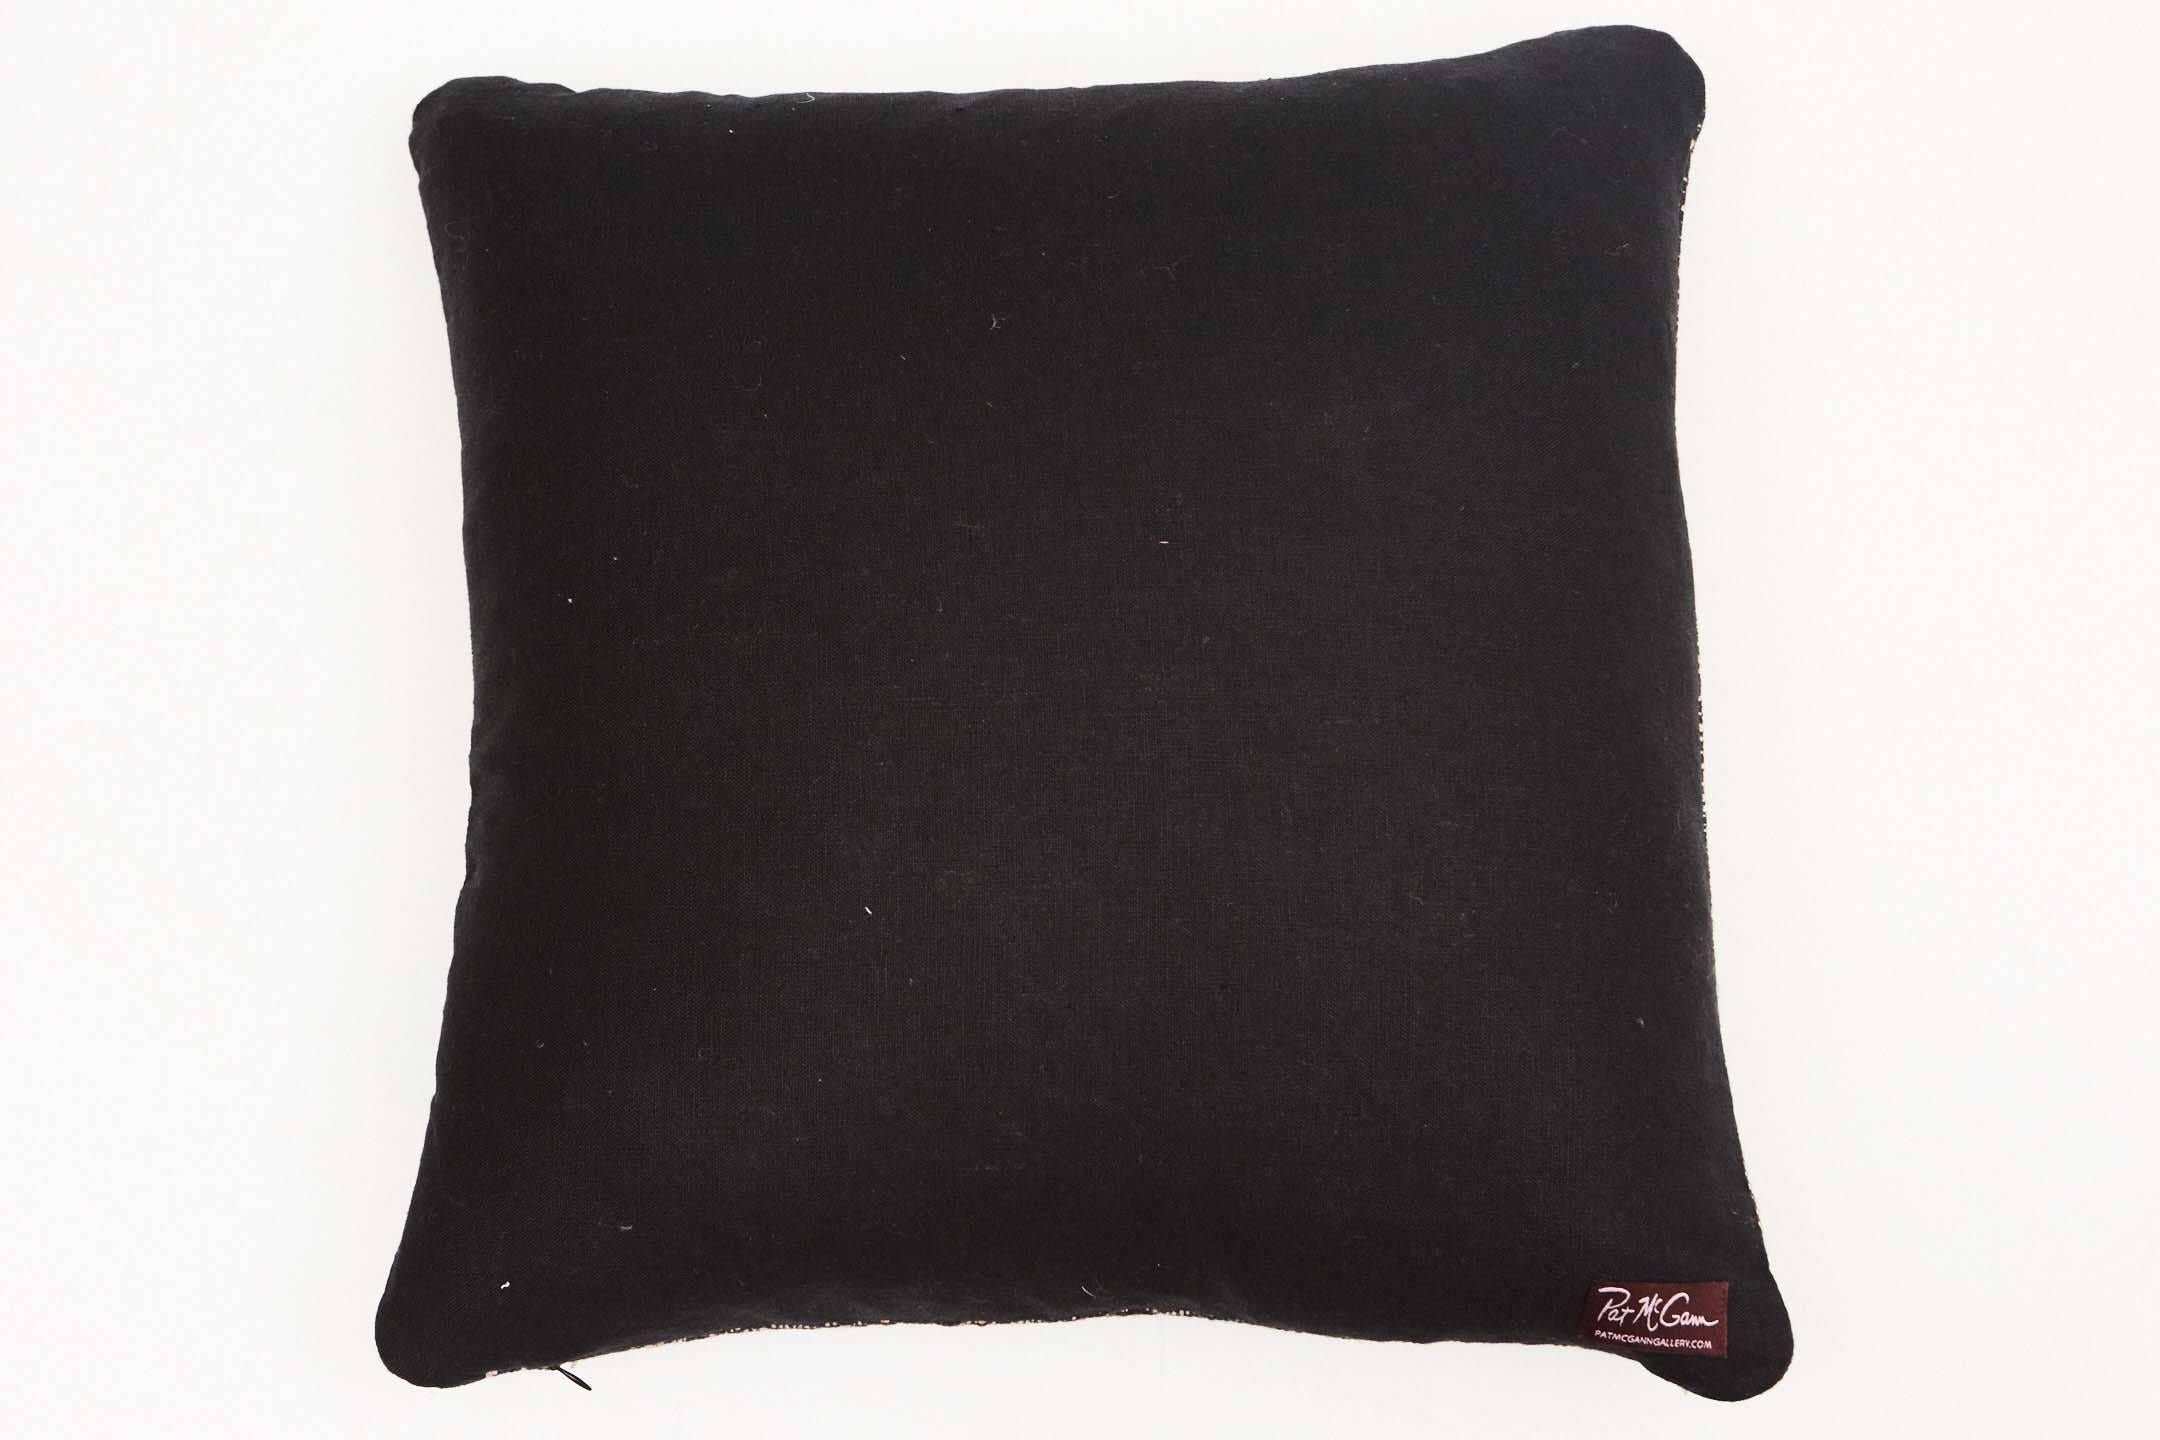 Hand-Woven Indian Handwoven Pillow in Black and Ivory